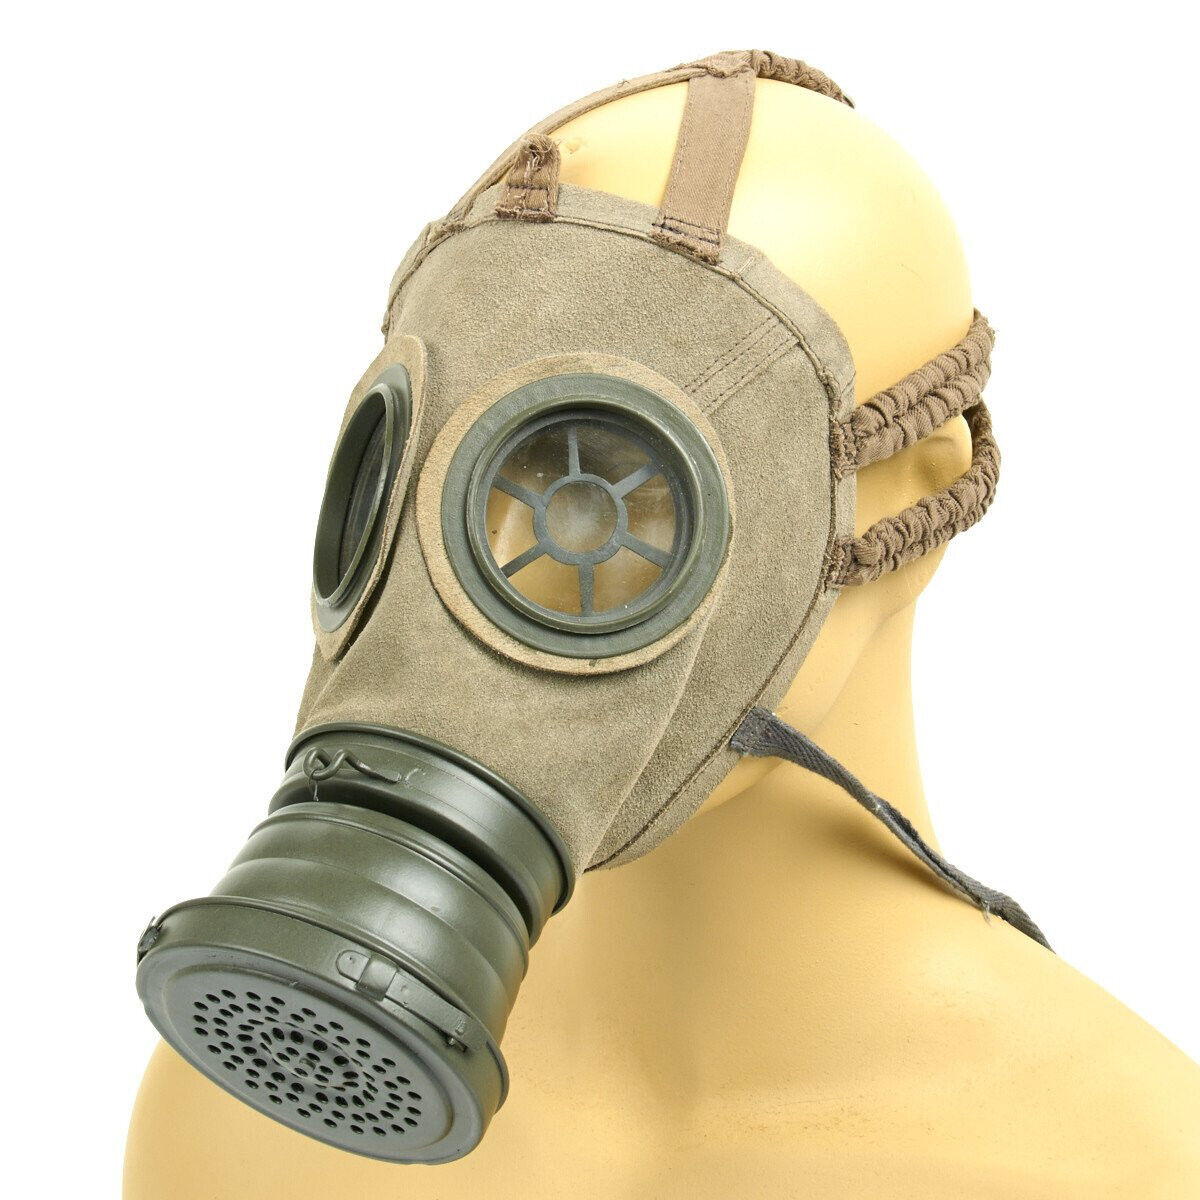 Imperial German WWI Leather Gas Mask - Reproduction